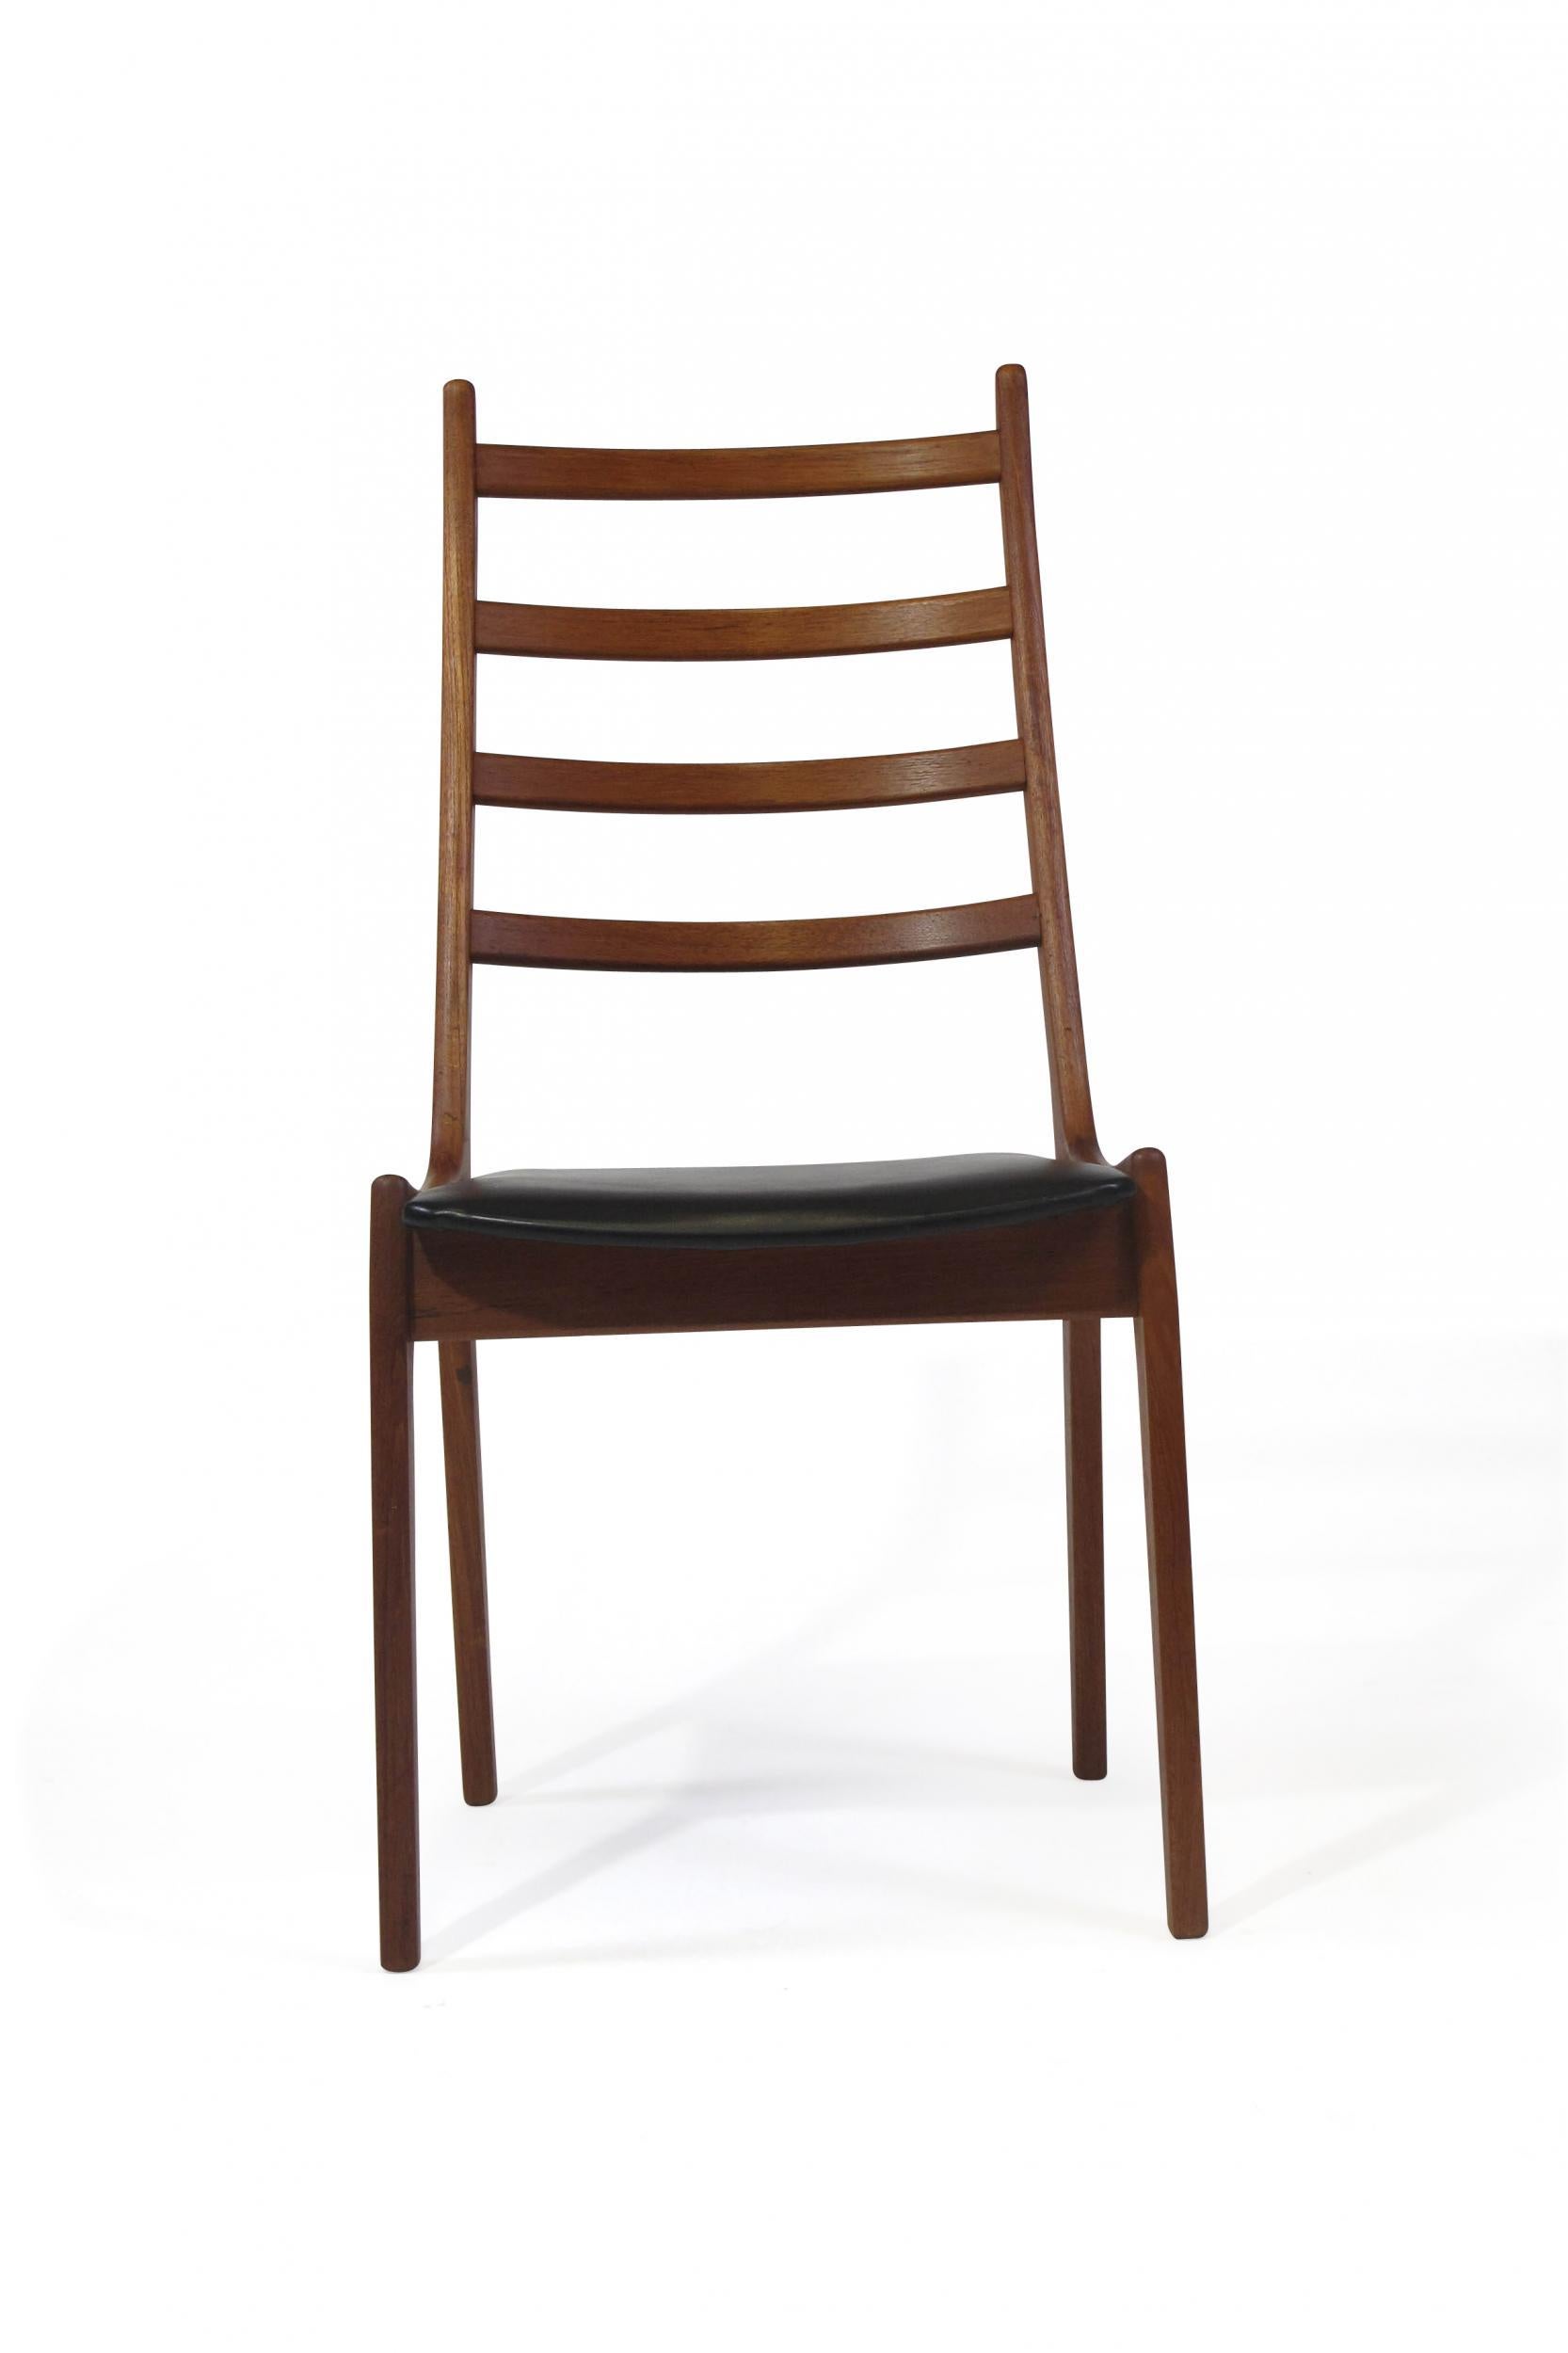 Pair of high-back teak dining chairs by Korup Stolefabrik Mobelfabrik fcrafted of solid teak frames with finger joinery upholstered in the original black vinyl seat. Lightly restored and in good condition with minor signs of age and use.
Note